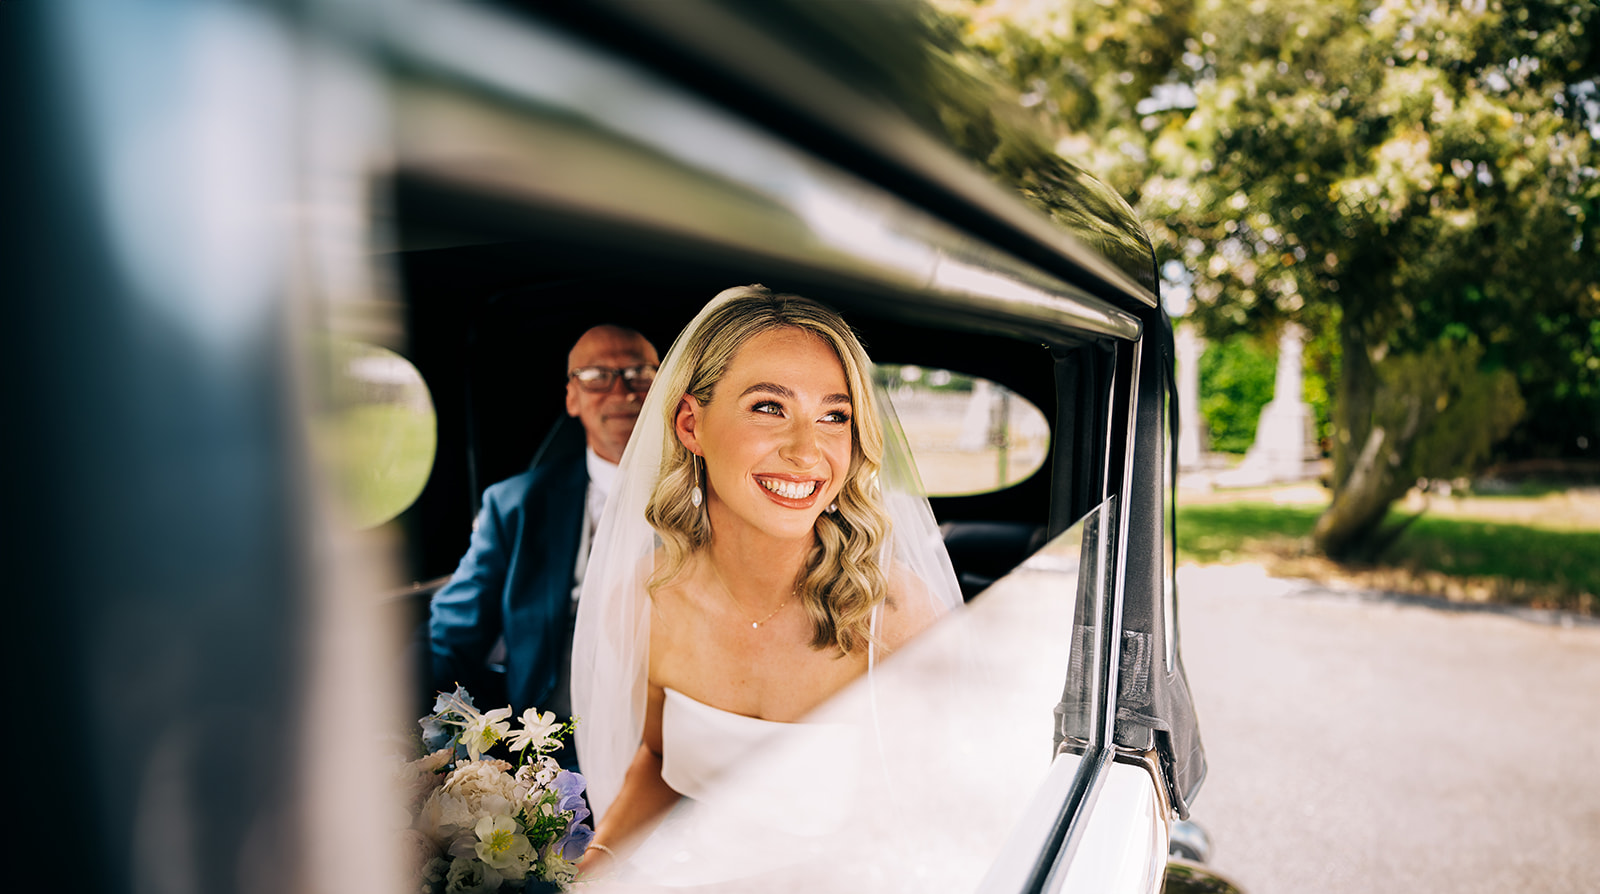 Orlaith arrive at the church to wed her best friend